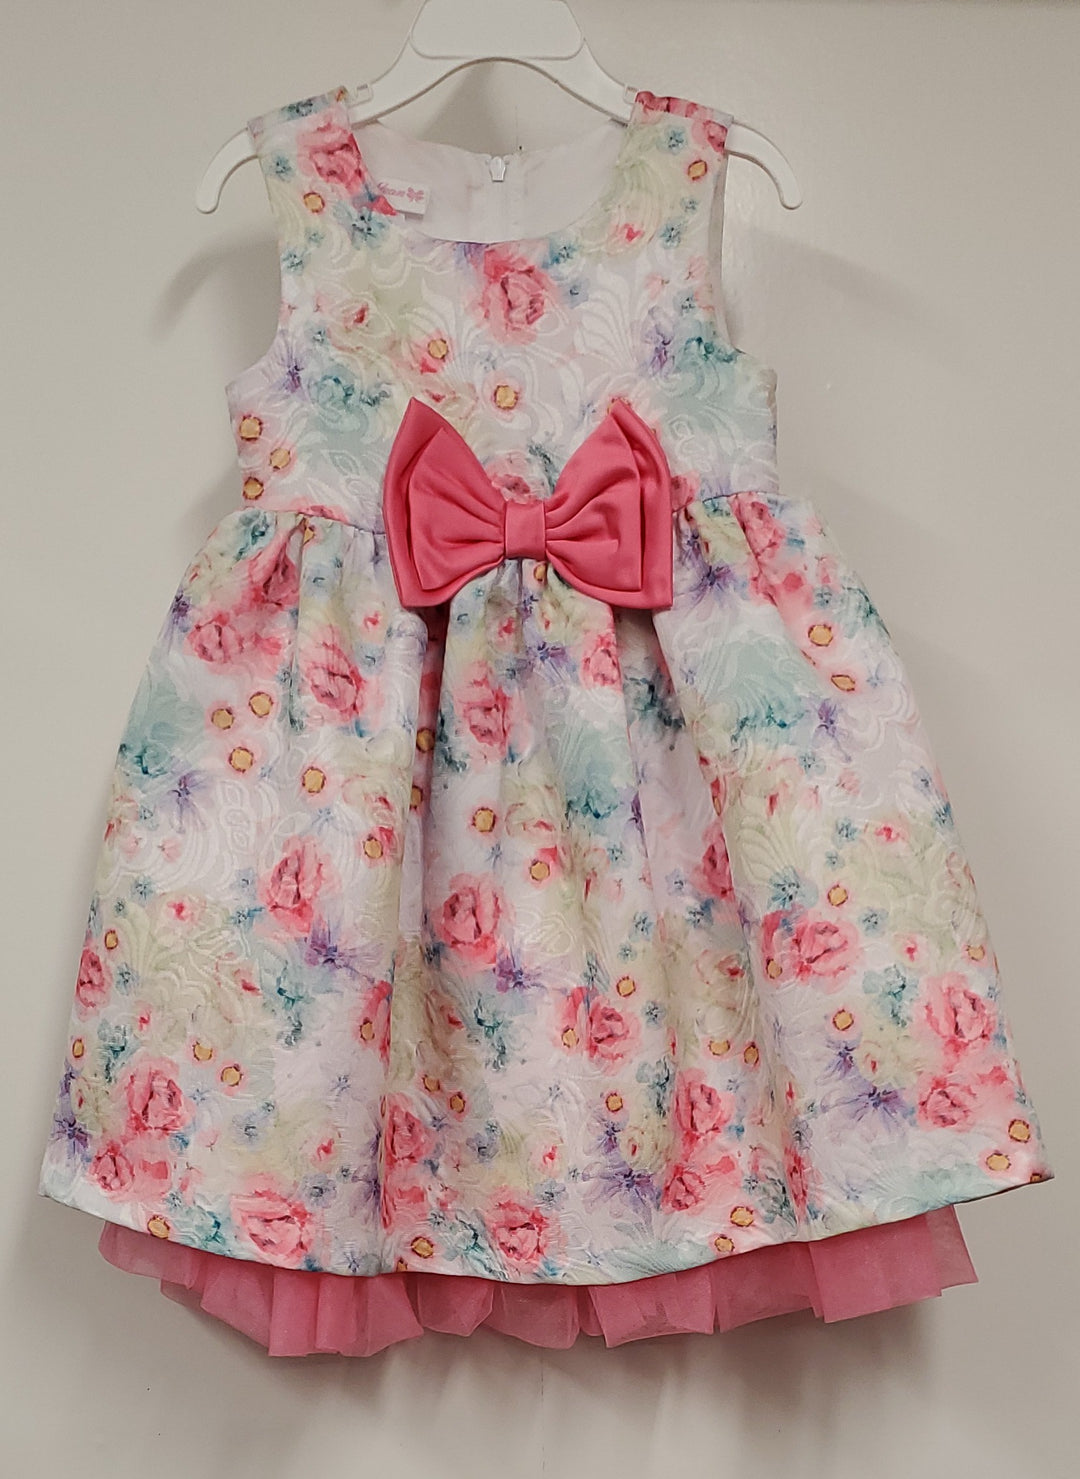 Toddler Pink Floral Print Dress with Bow-tie